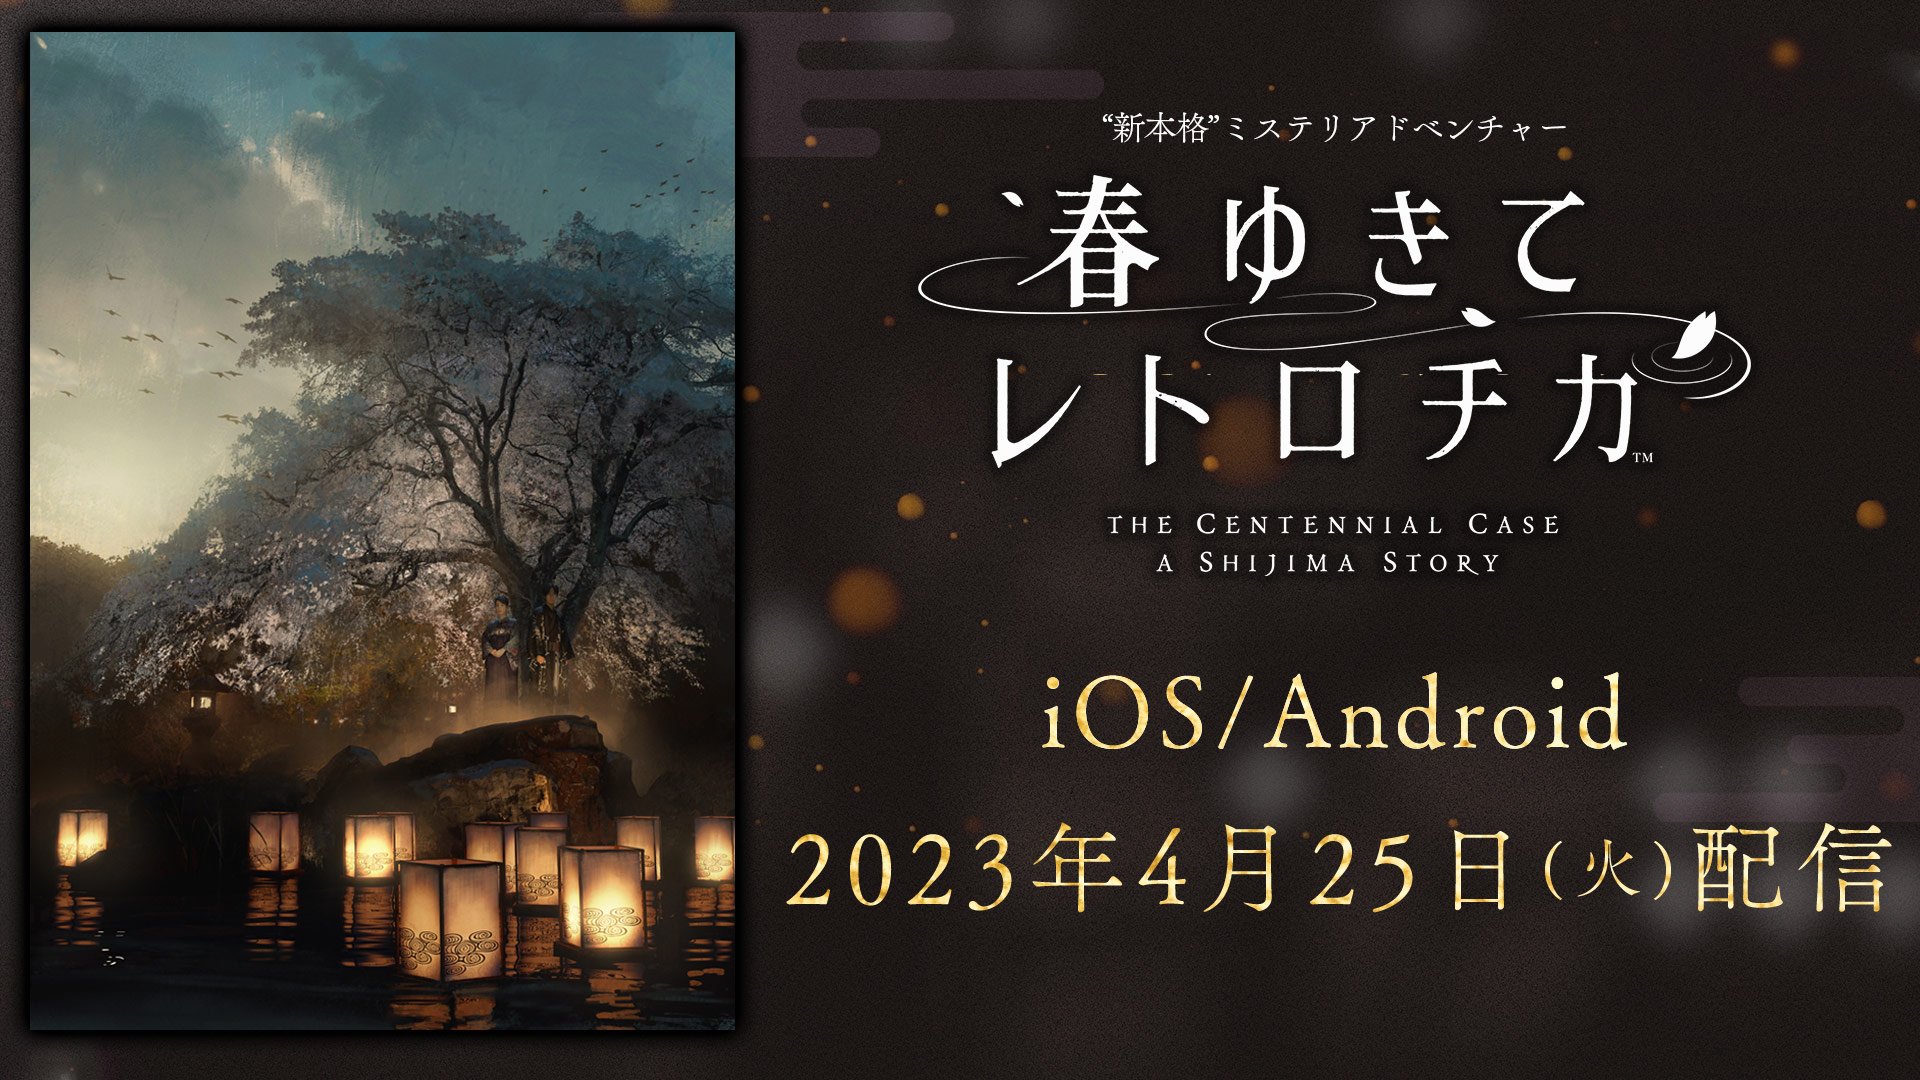 #
      The Centennial Case: A Shijima Story coming to iOS, Android on April 25